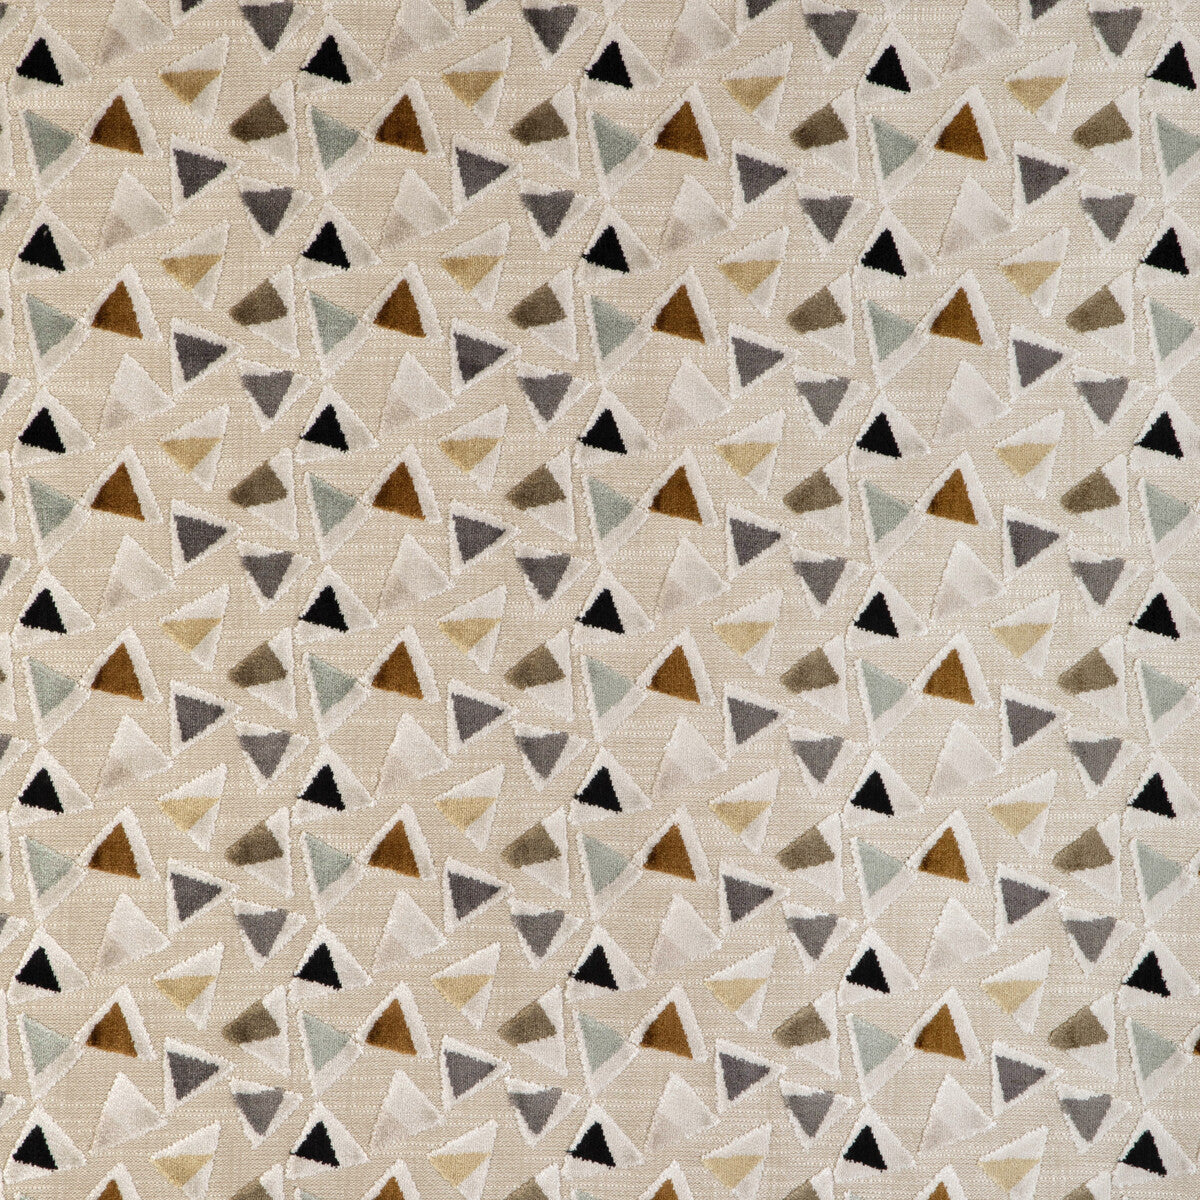 Trio Tango fabric in moonlit color - pattern 36887.616.0 - by Kravet Design in the Mid-Century Modern collection